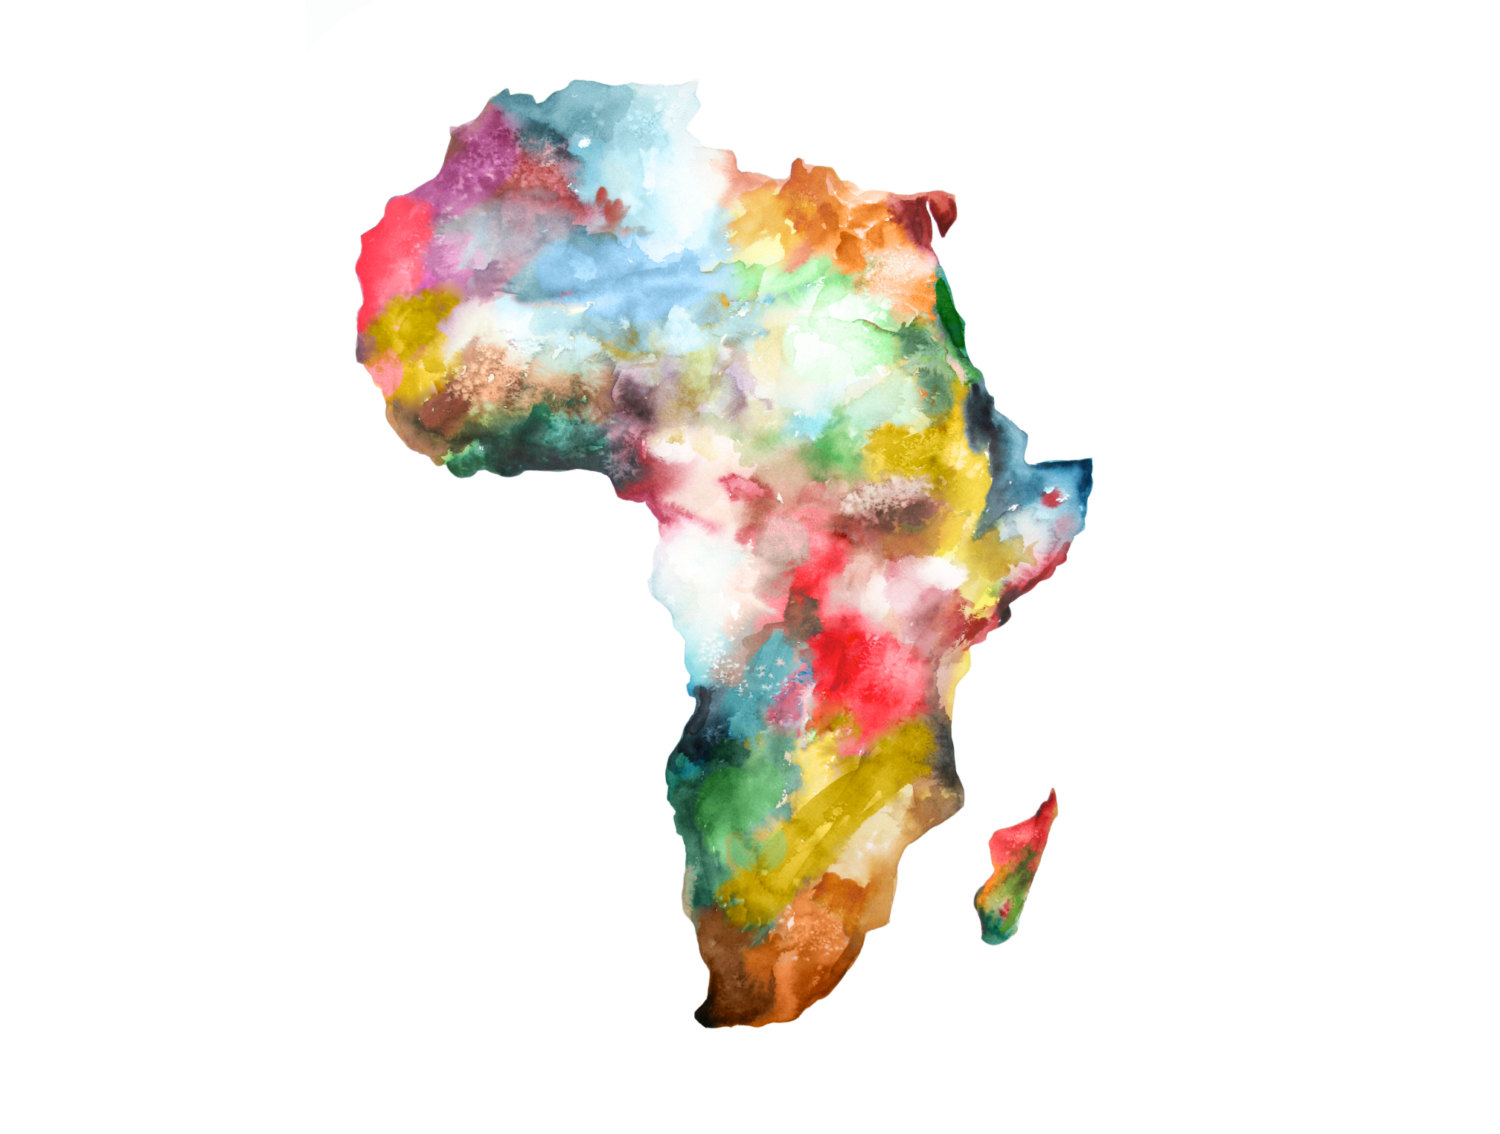 Announcing the Sarah Meek Travel Grant for Research in Africa